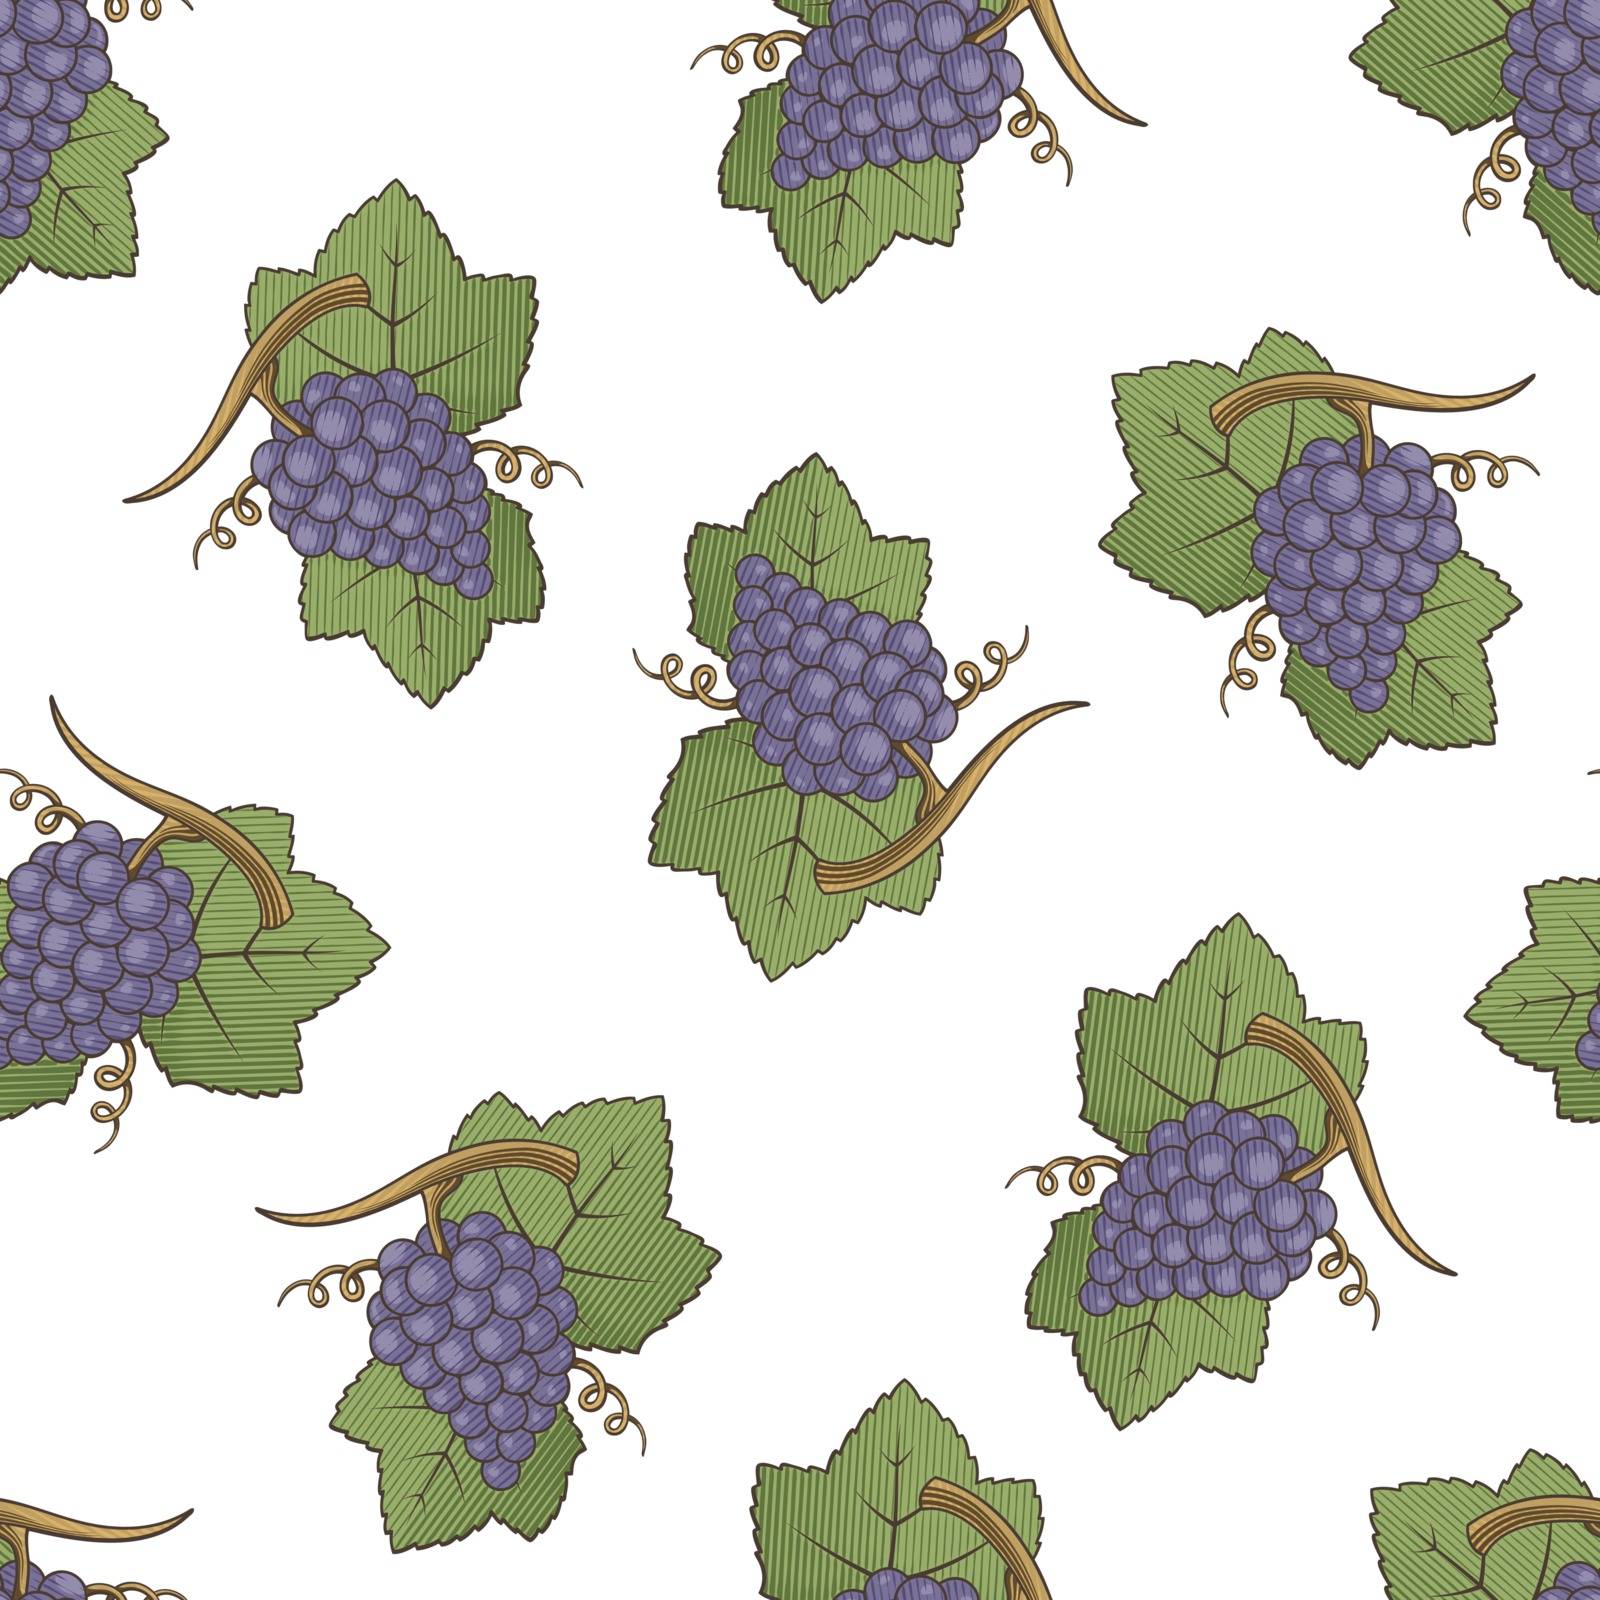 Purple grapes with leaves colored illustration seamless pattern background with engraving shading.